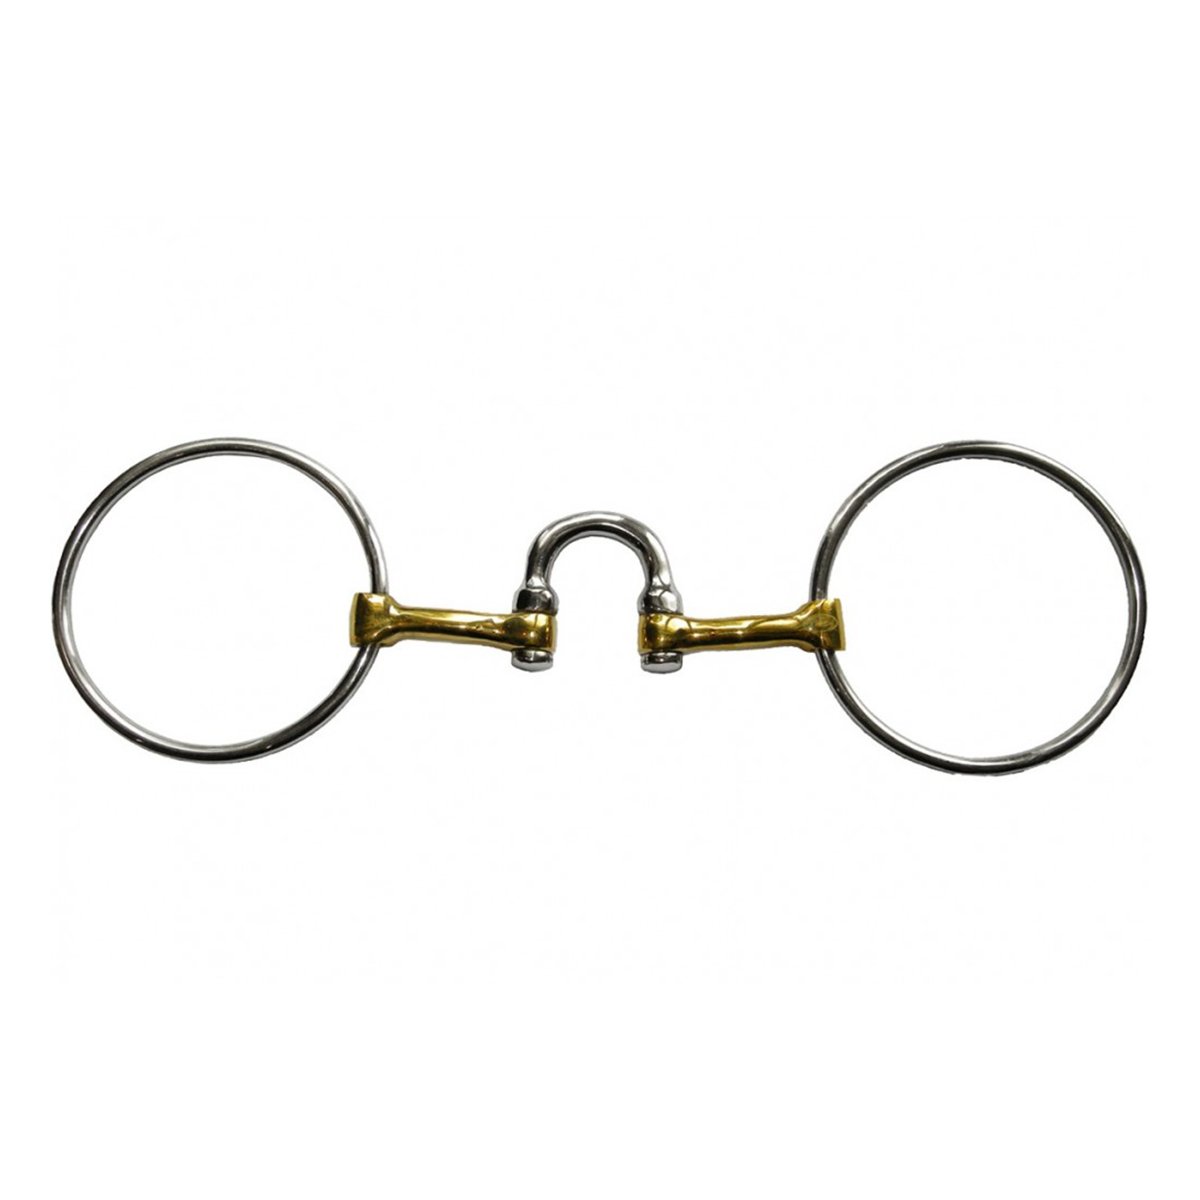 Jump'in High Port Loose Ring Bit